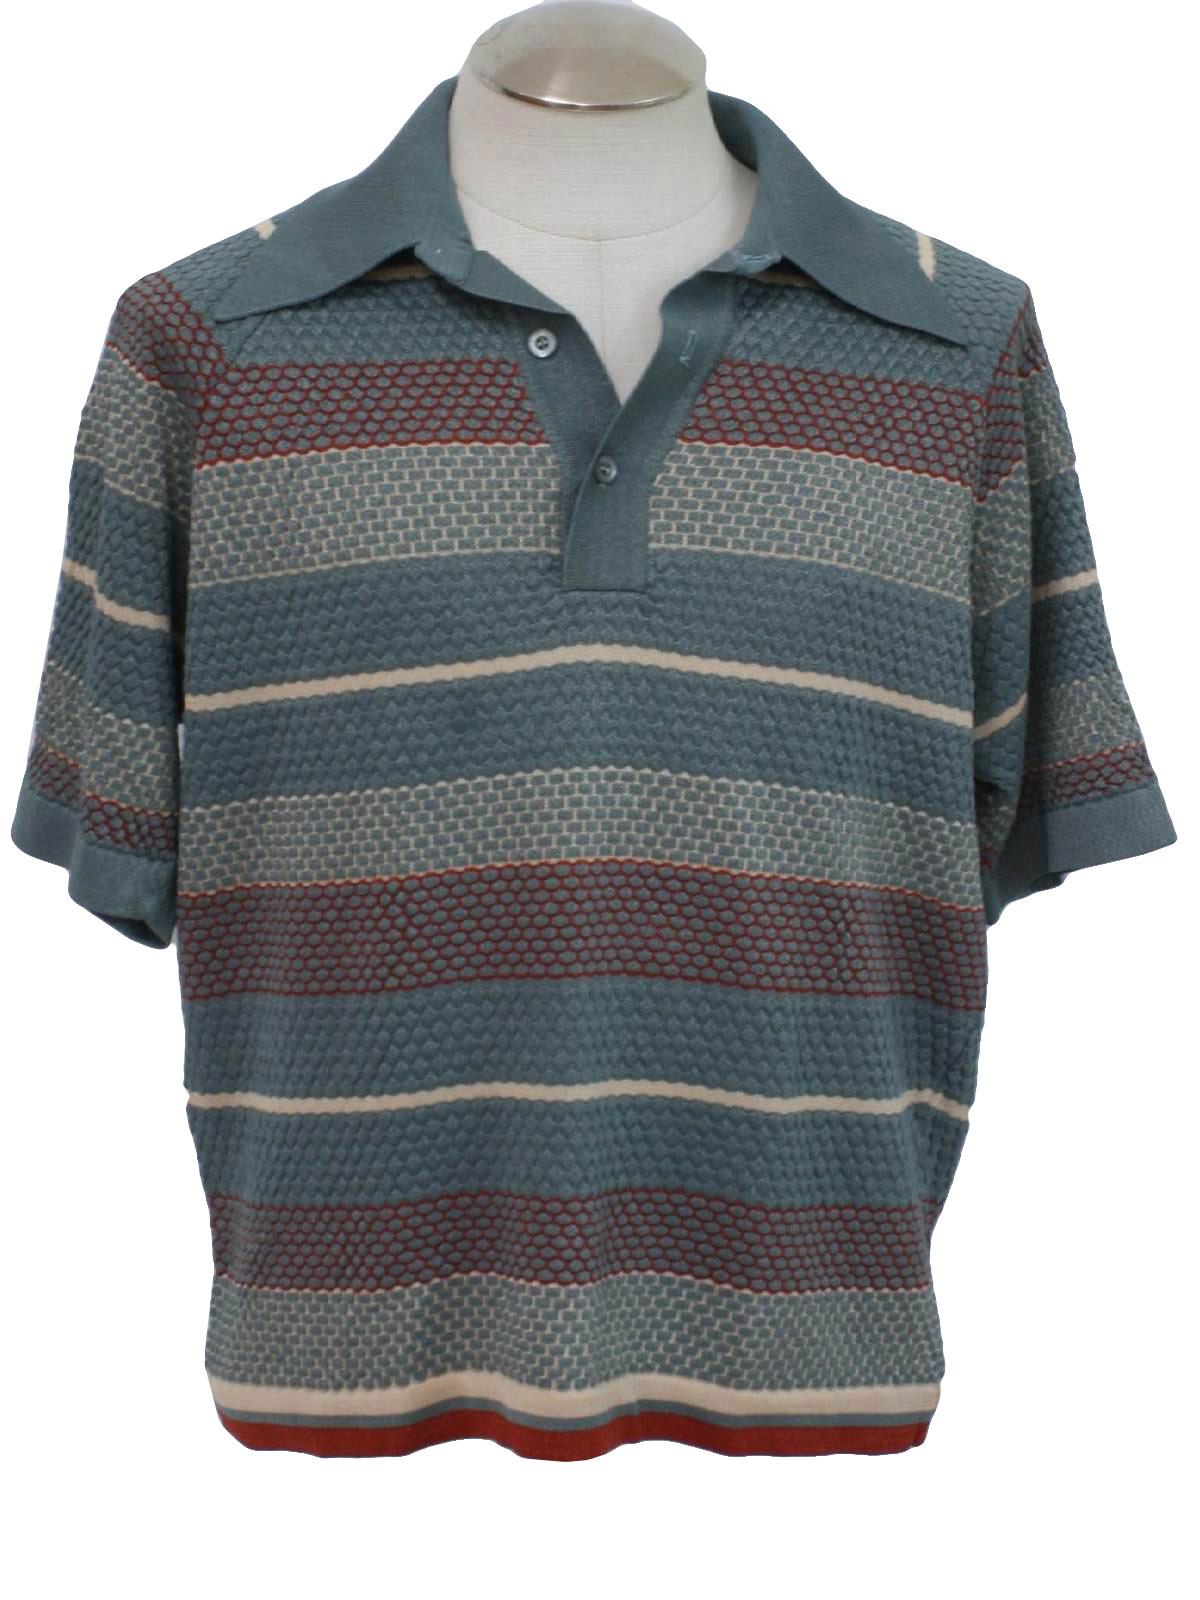 Vintage 70s Knit Shirt: 70s -Donegal- Mens dusty teal, rust-red and ...